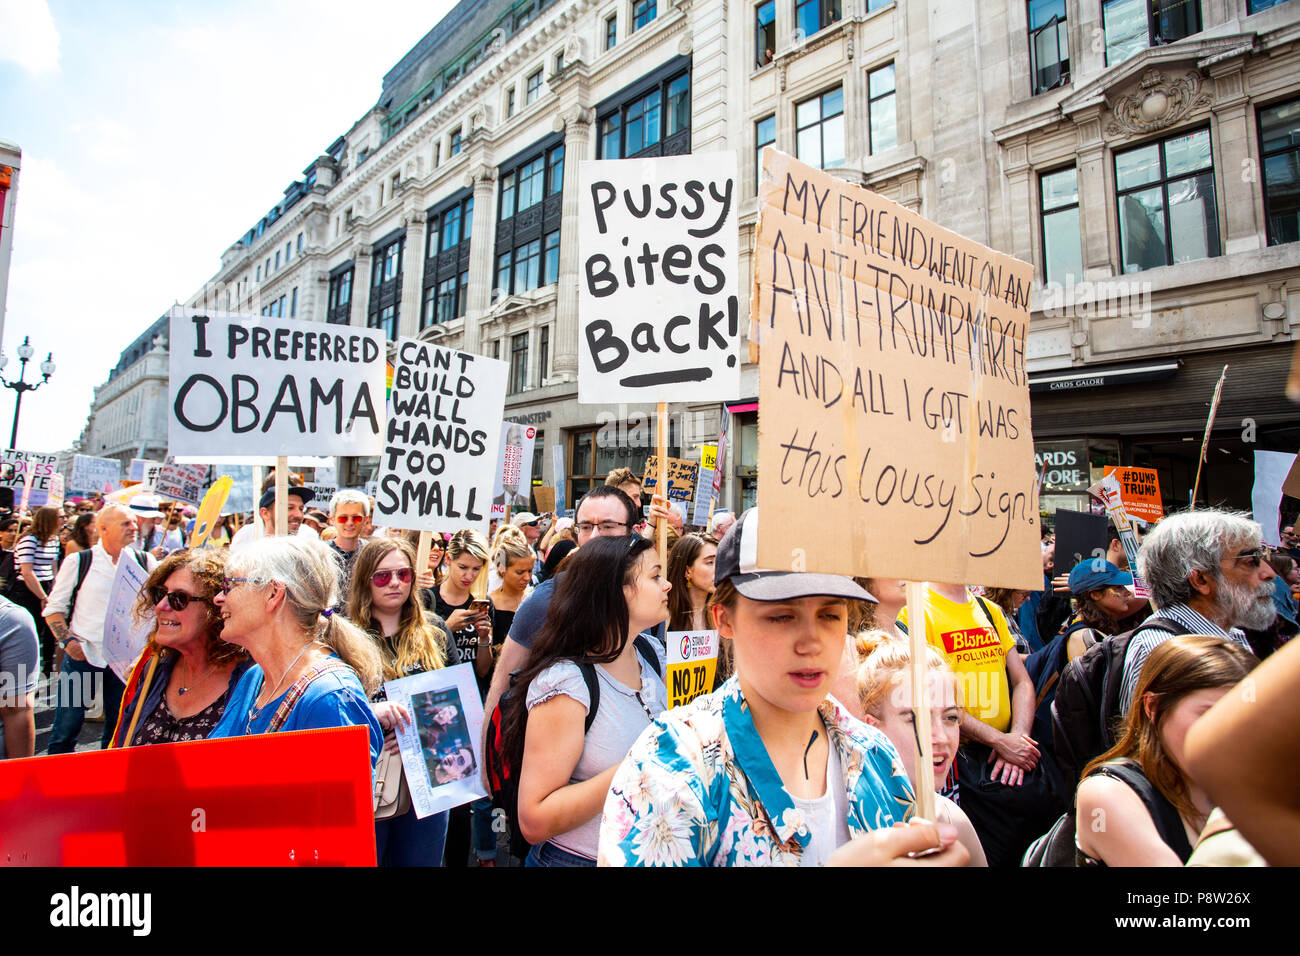 London/United Kingdom - July 13, 2018: Protests against Donald Trump continue with a march in central London ending up in Trafalgar Square for a rally. No topic was left unturned. Credit: Martin Leitch/Alamy Live News Stock Photo